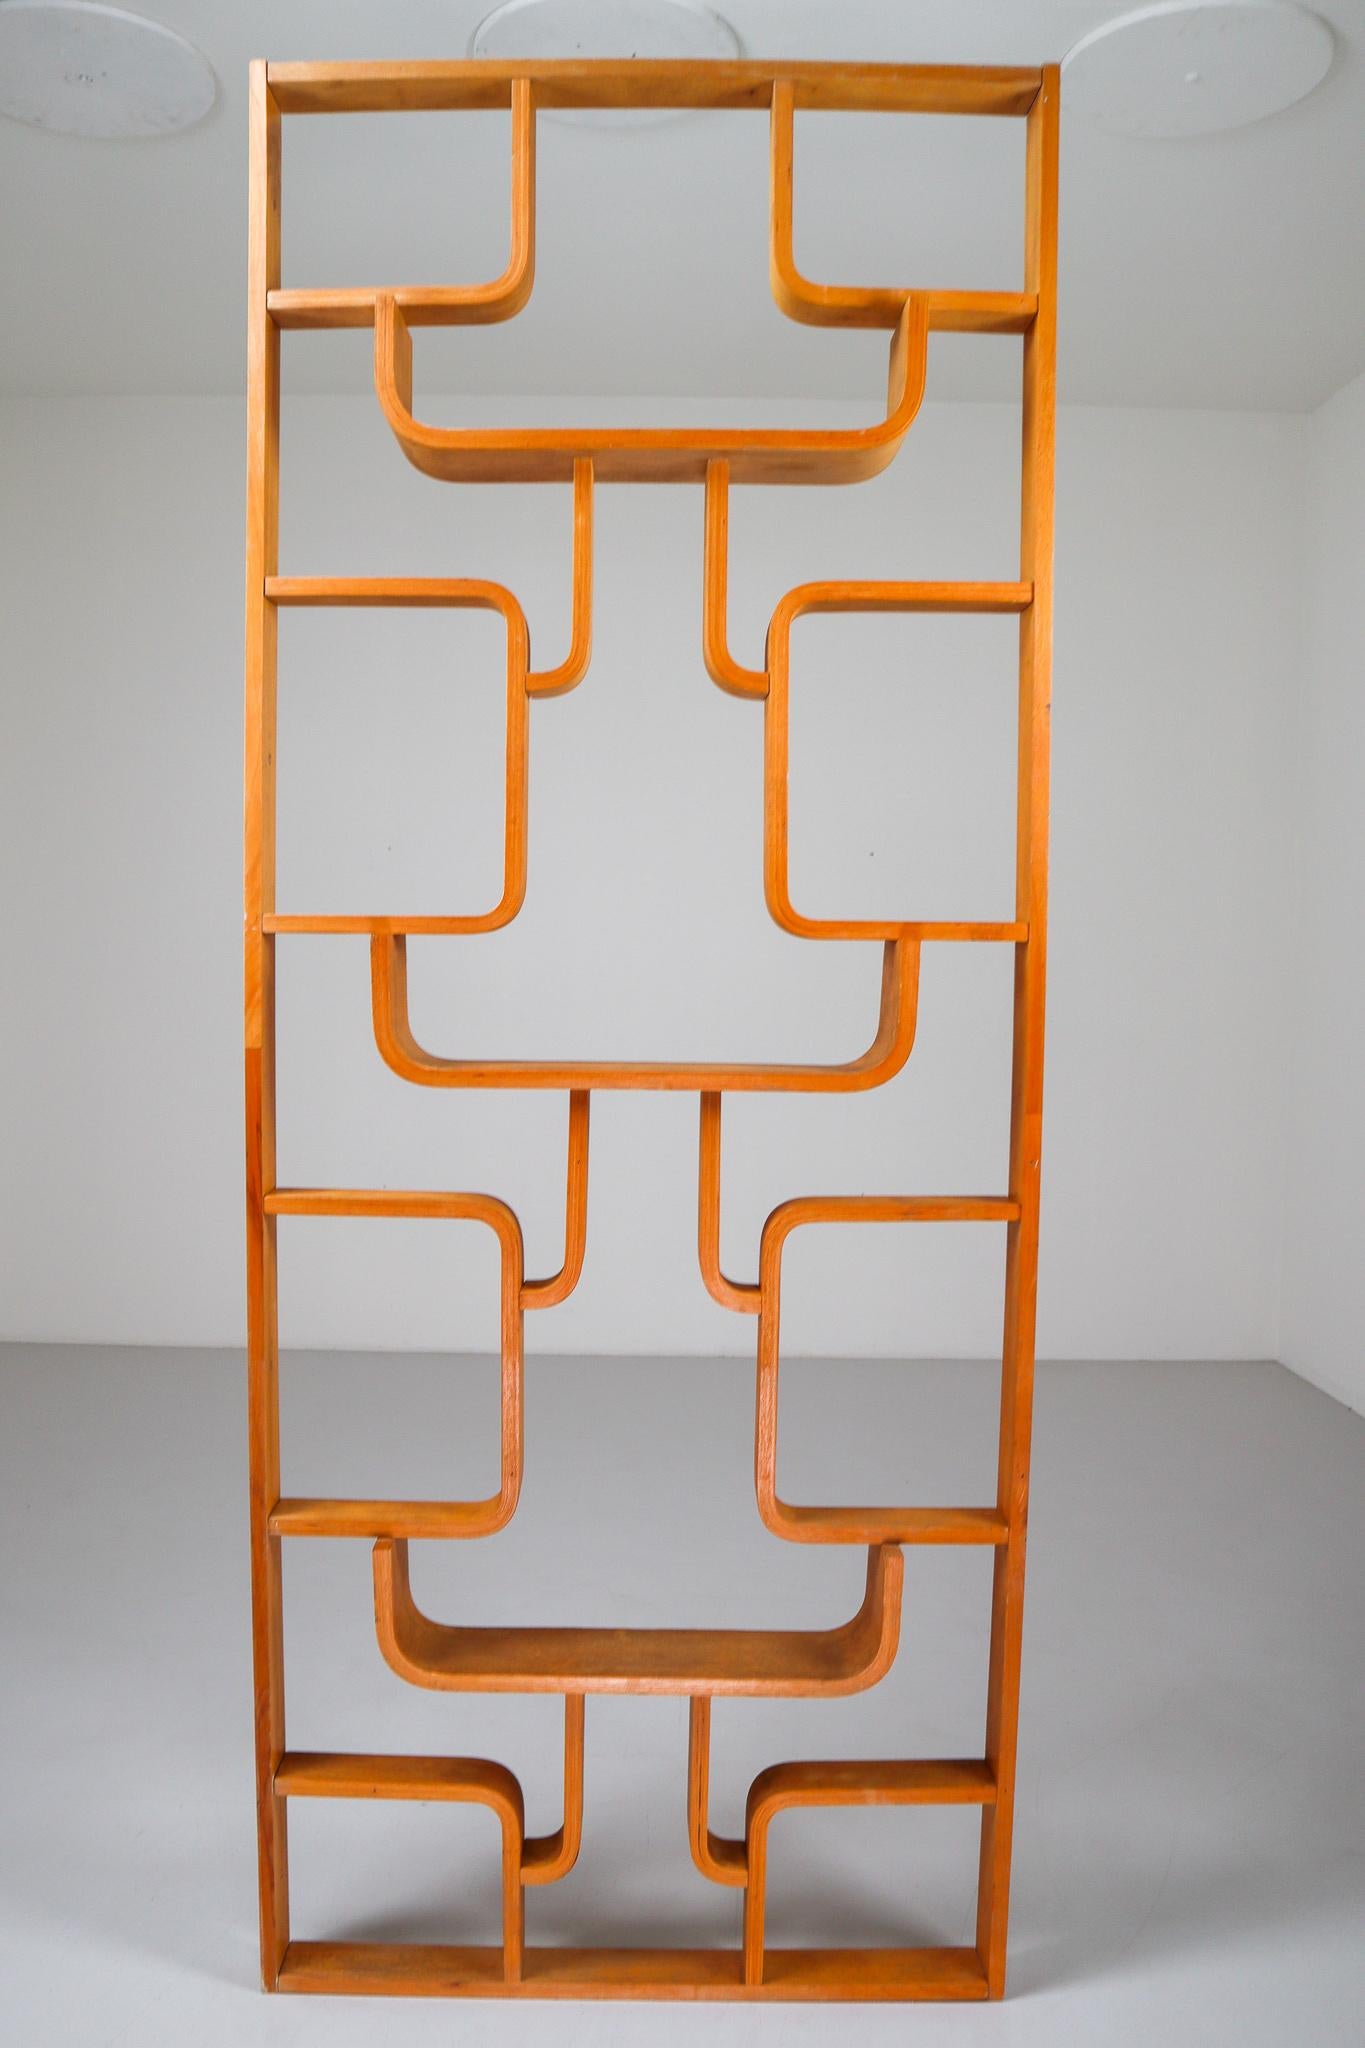 A unique 1960s piece of Czech design, part of a limited five year production. Can be used as a wall-mounted shelving unit or room divider. Square edges in blond color plywood and features geometric patterns. Designed by Ludvik Volak in the Czech